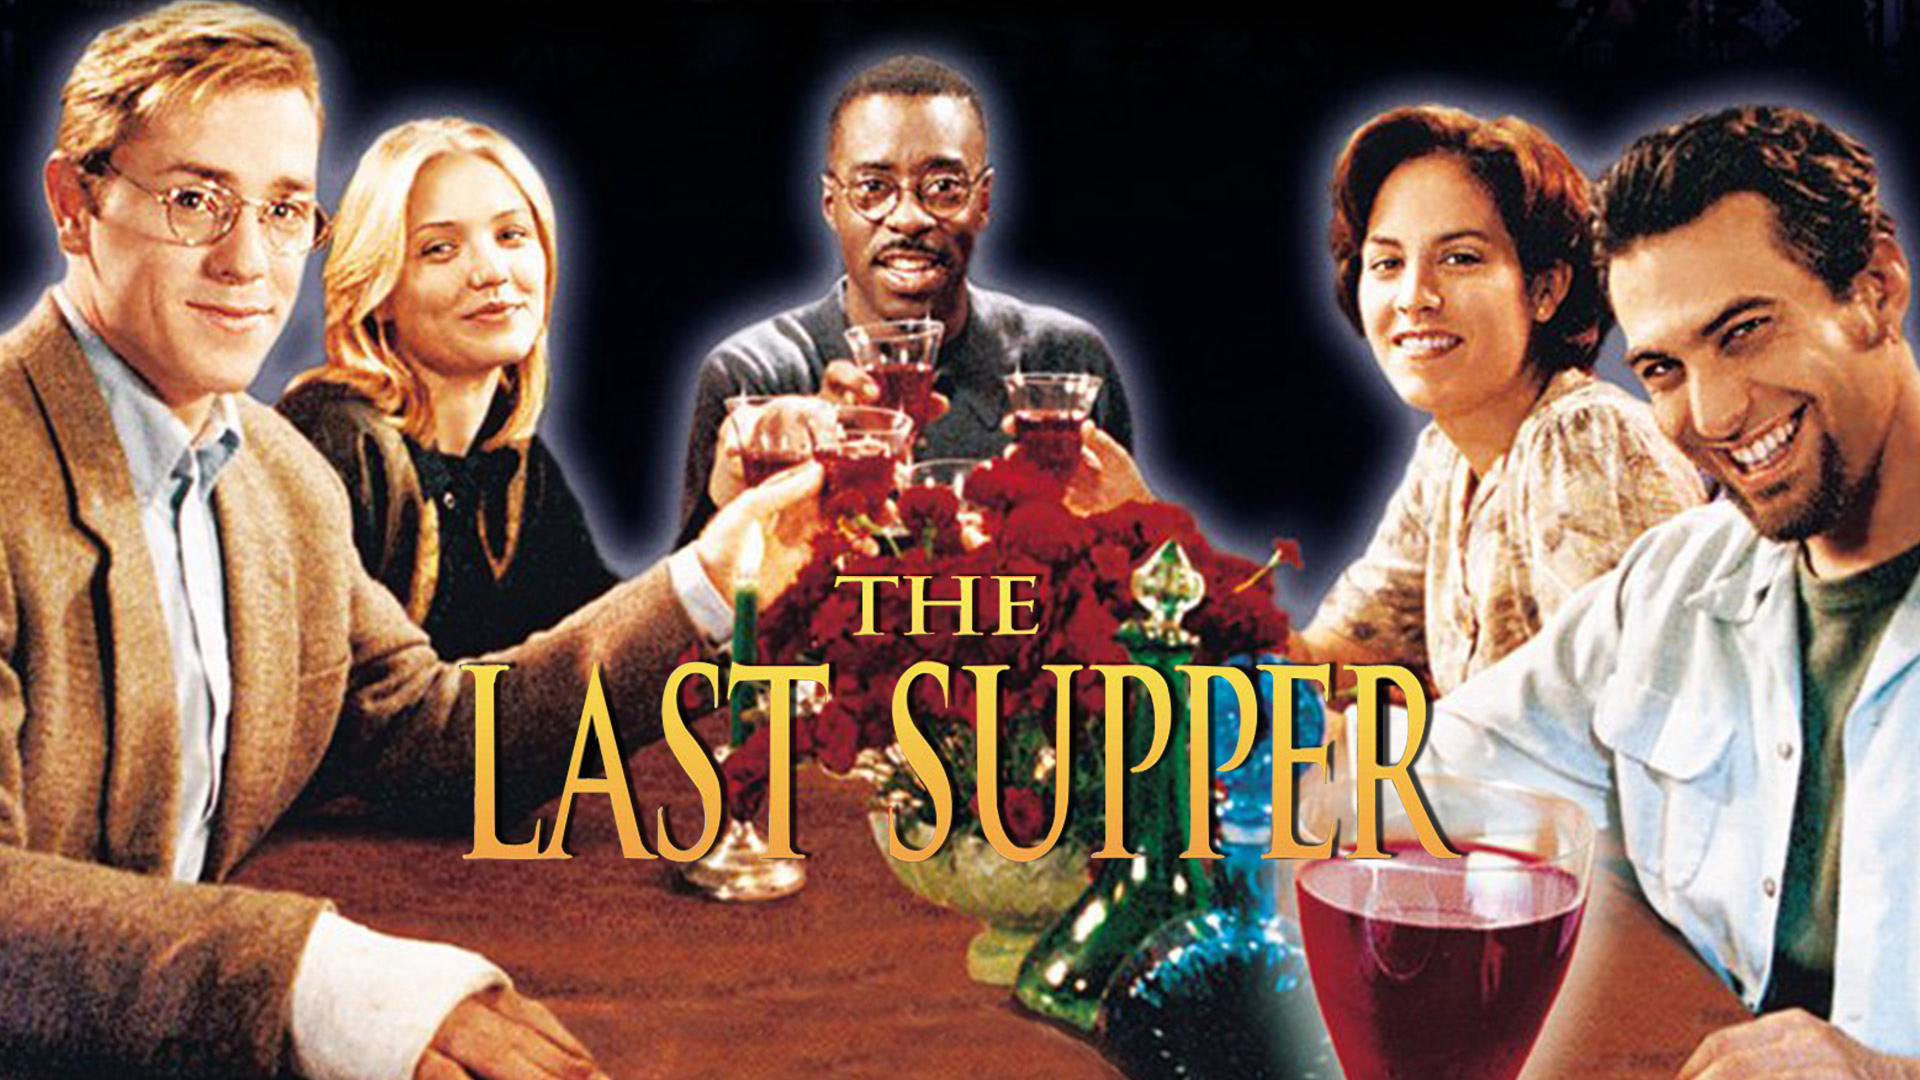 The Last Supper / The Last Supper (2012)